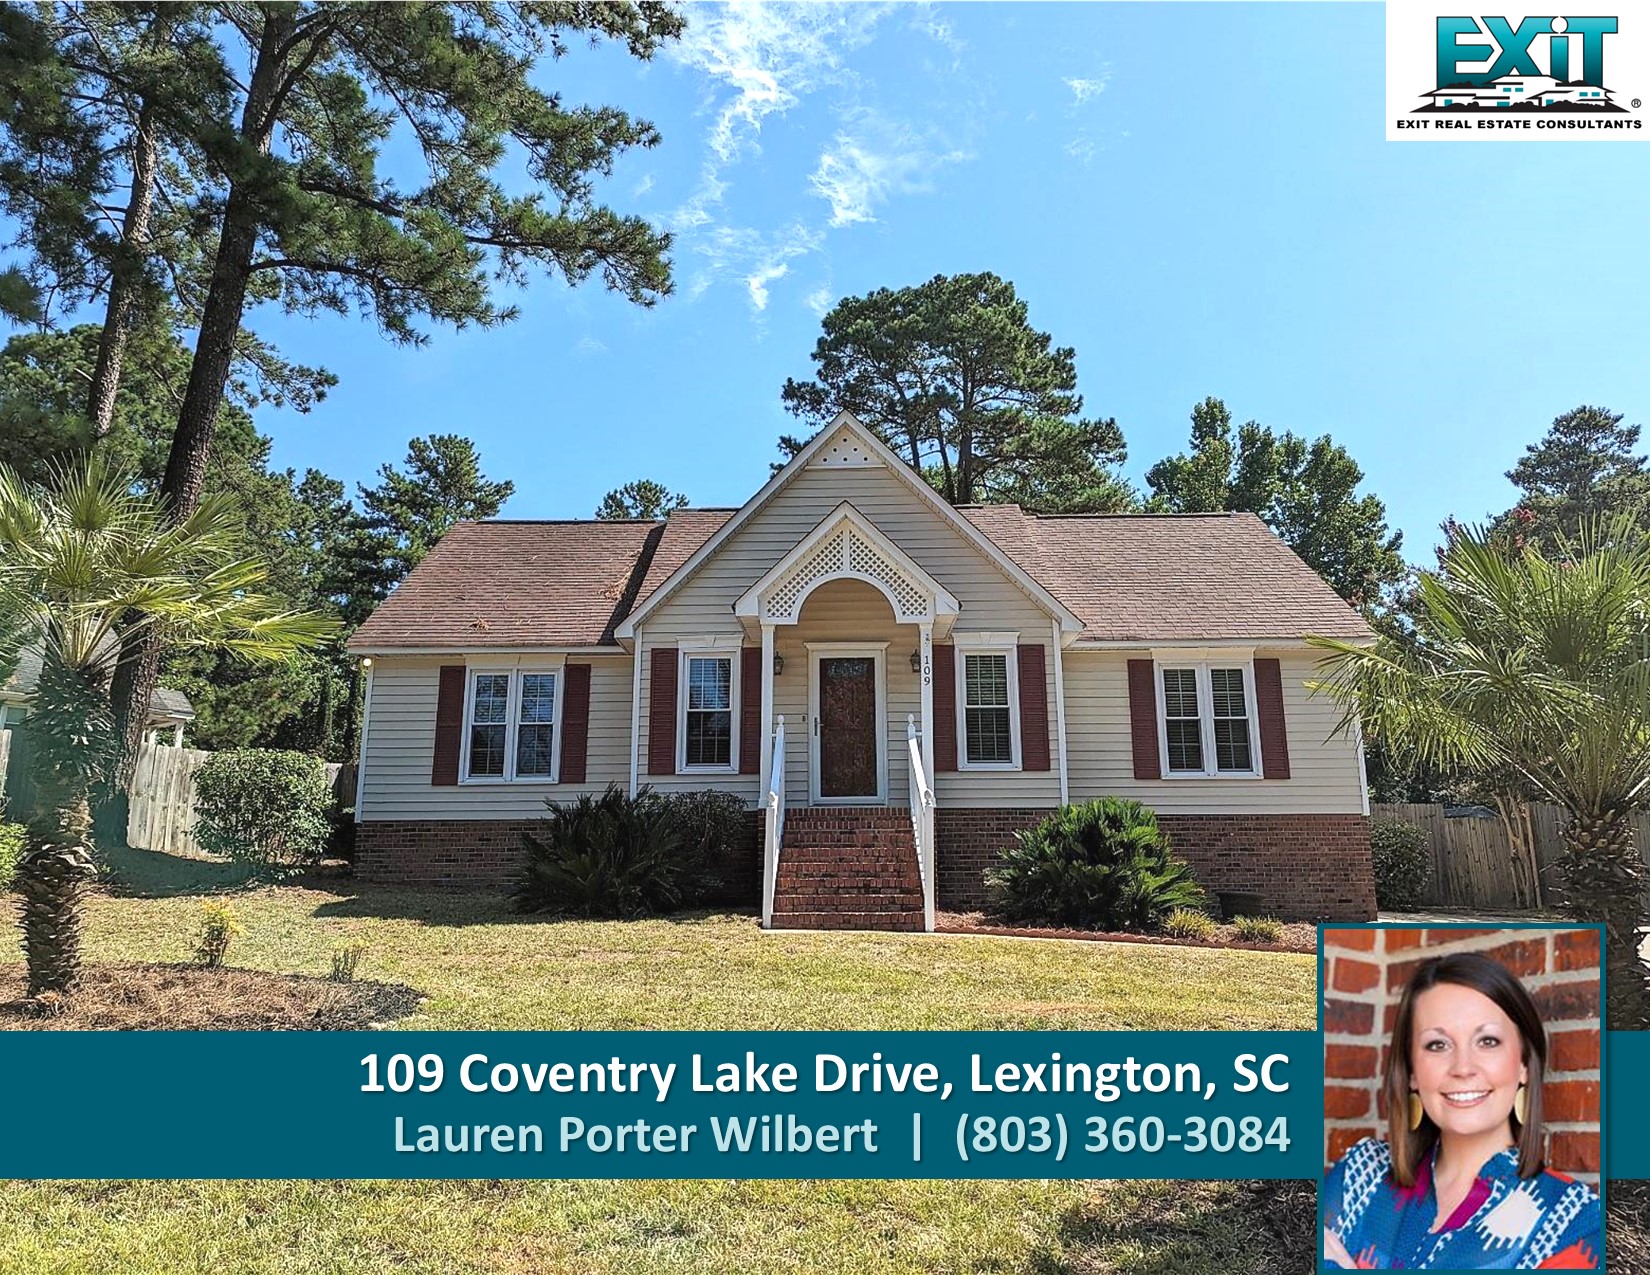 Just listed in Coventry Lakes